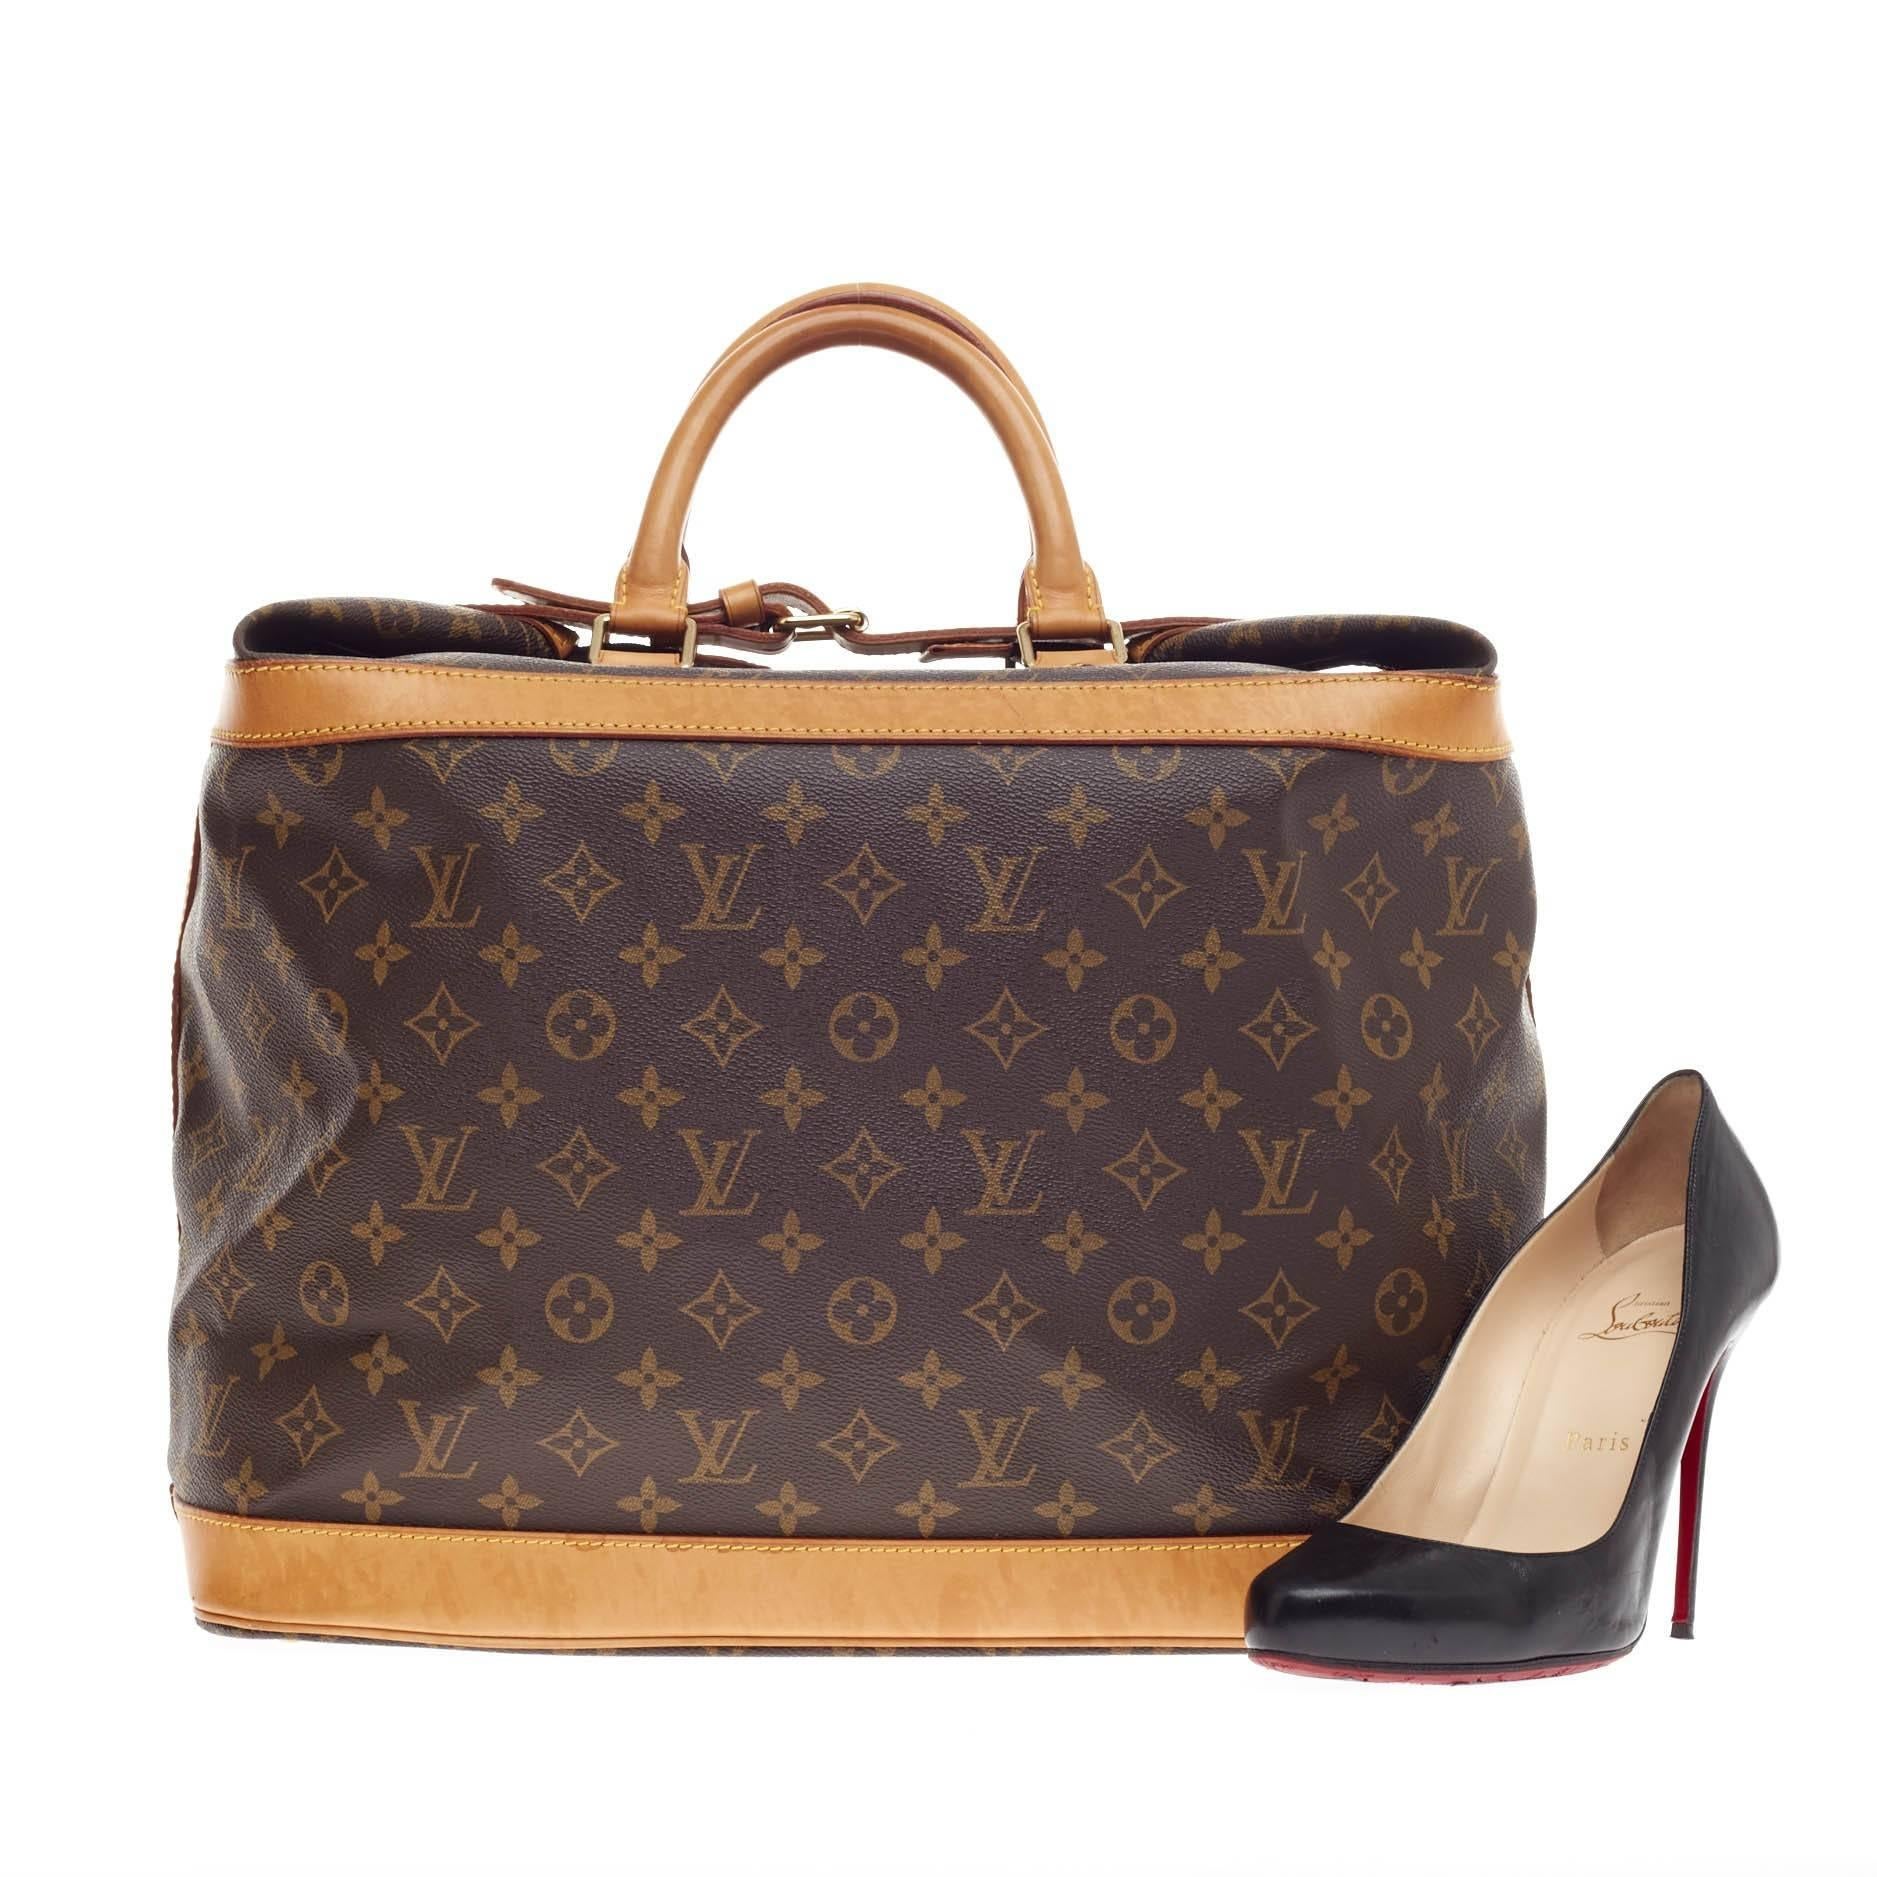 This authentic Louis Vuitton Cruiser Monogram Canvas 40 showcases the brand's timeless and luxurious style and functionality. Crafted in Louis Vuitton's iconic monogram canvas print, this chic travel box luggage features dual-rolled handles, cowhide